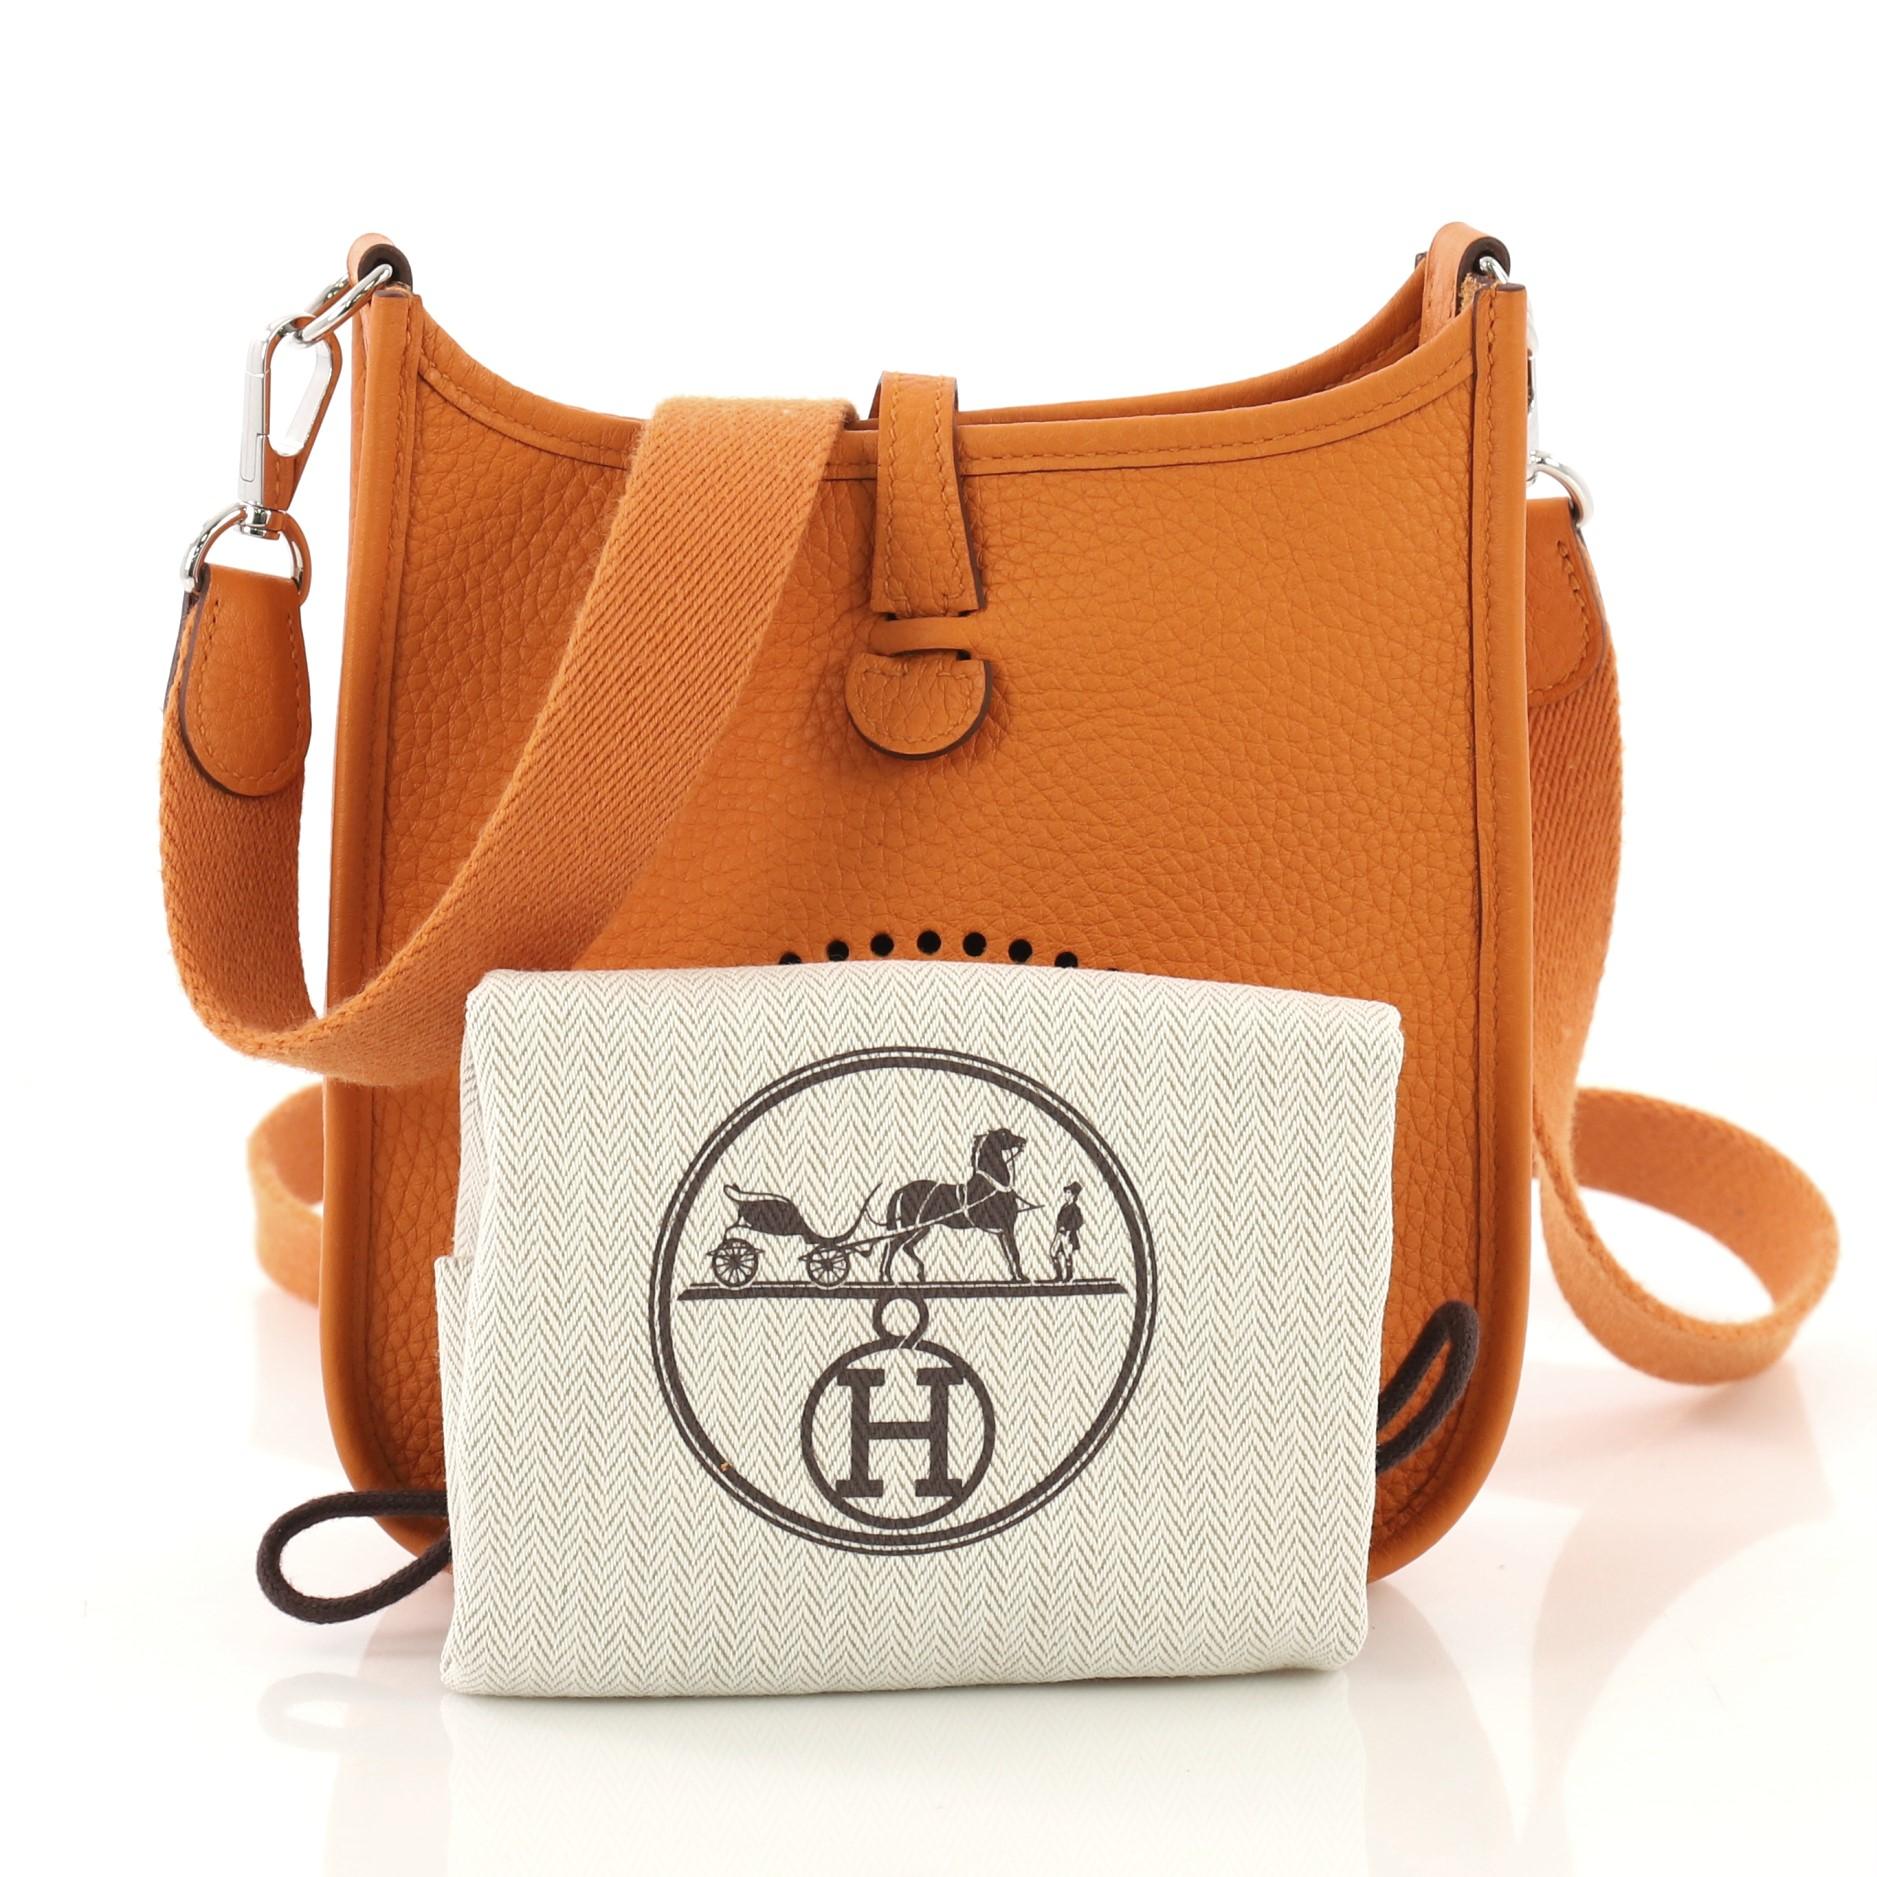 This Hermes Evelyne Crossbody Gen III Clemence TPM, crafted in Abricot orange Clemence leather, features perforated H design at the front, canvas shoulder strap, and palladium hardware. It opens to an Abricot orange raw leather interior. Date stamp